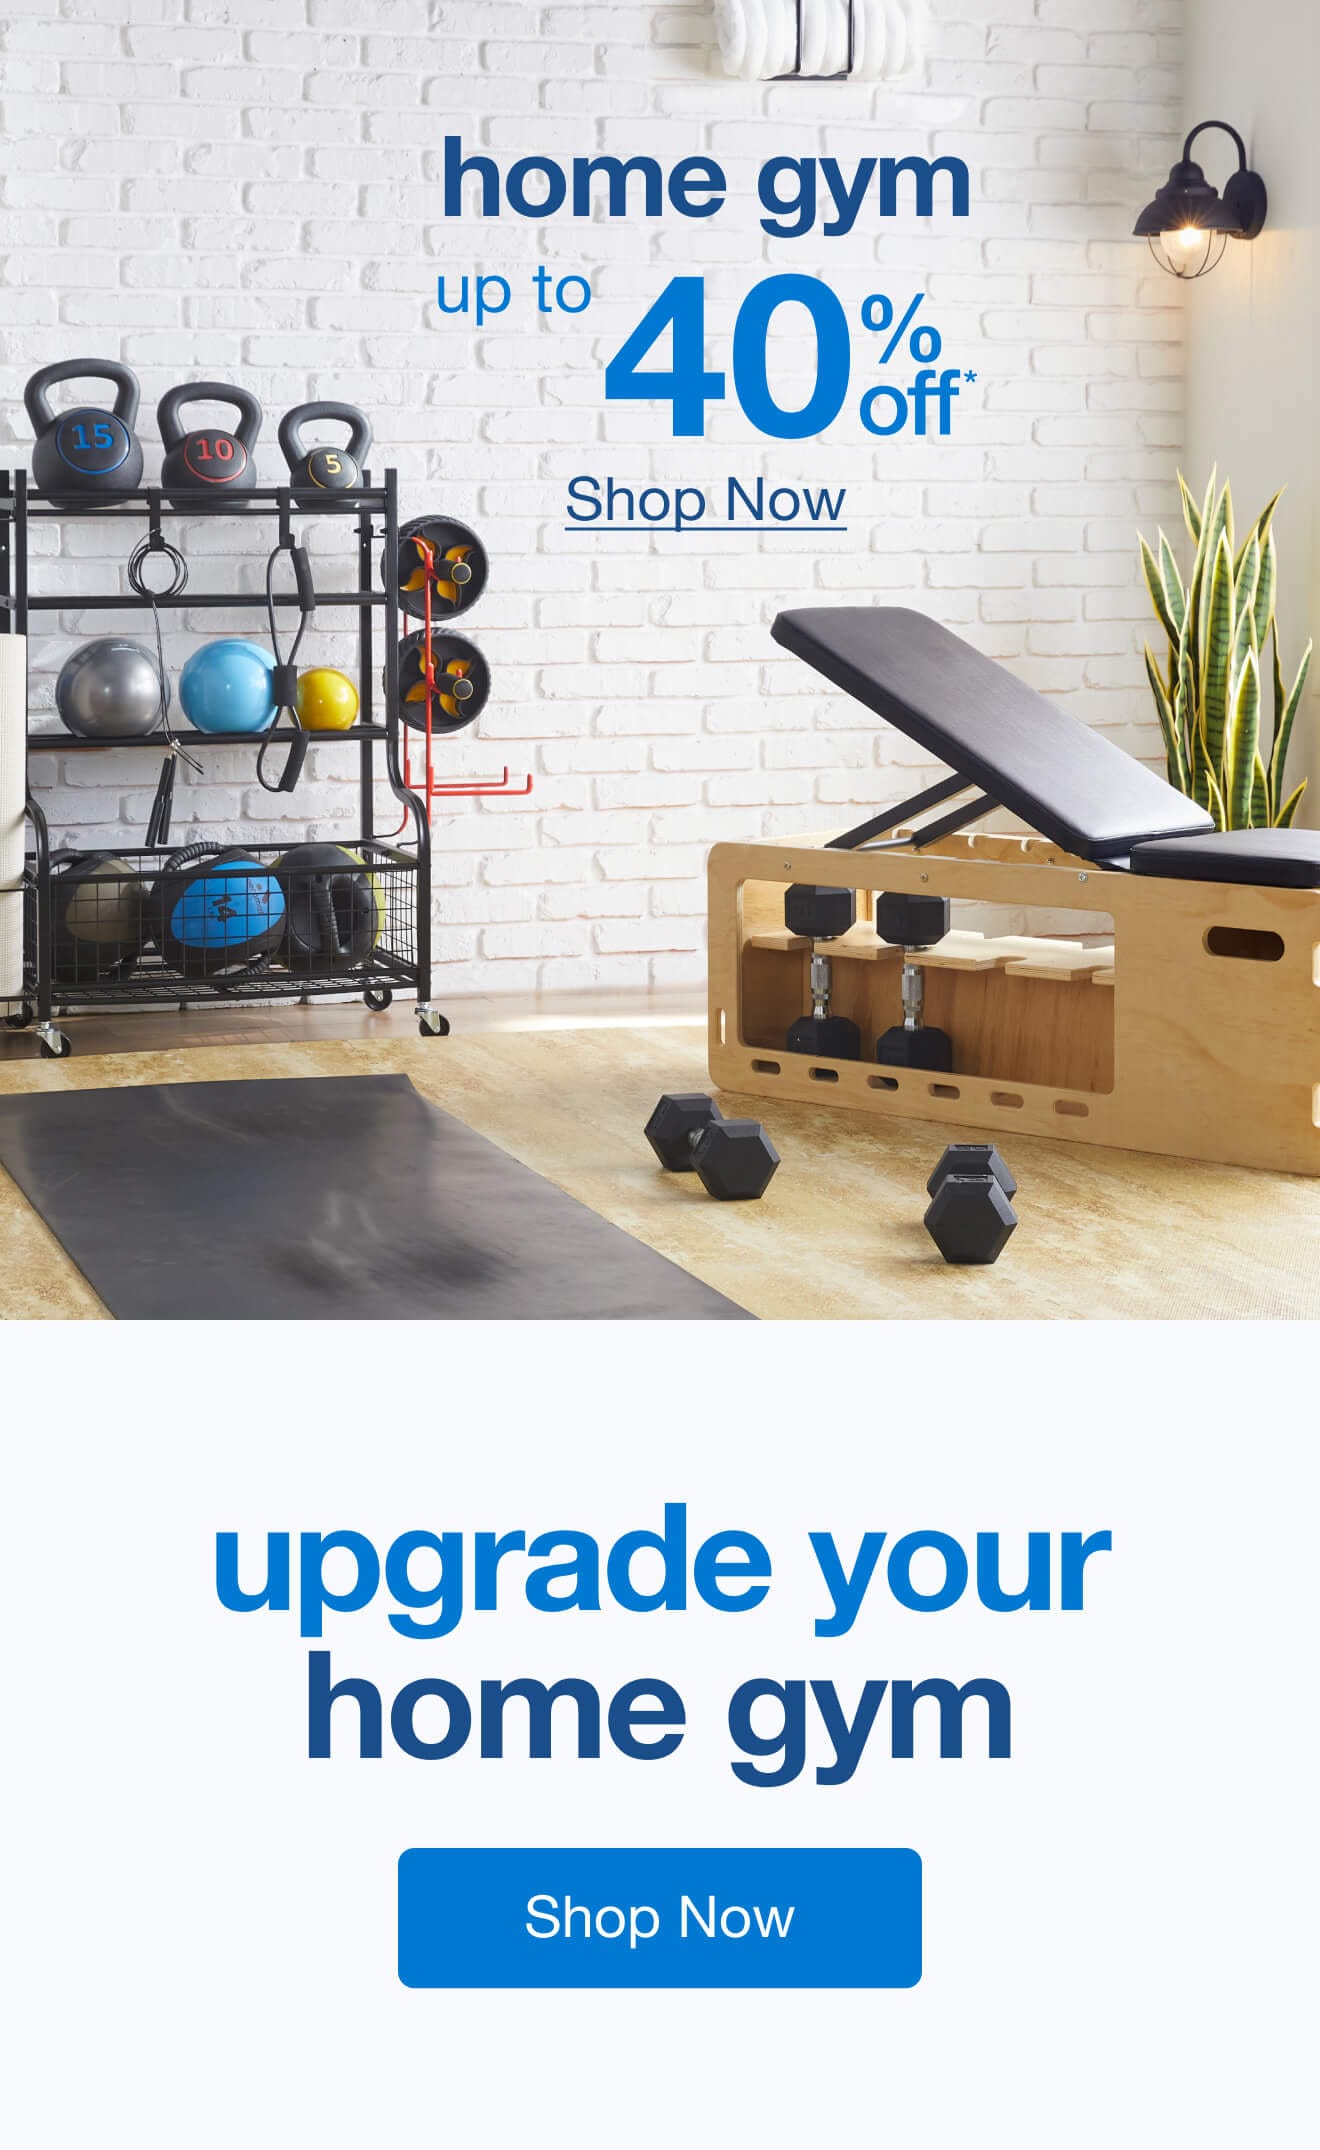 Home Gym Up to 40% Off - Shop Now